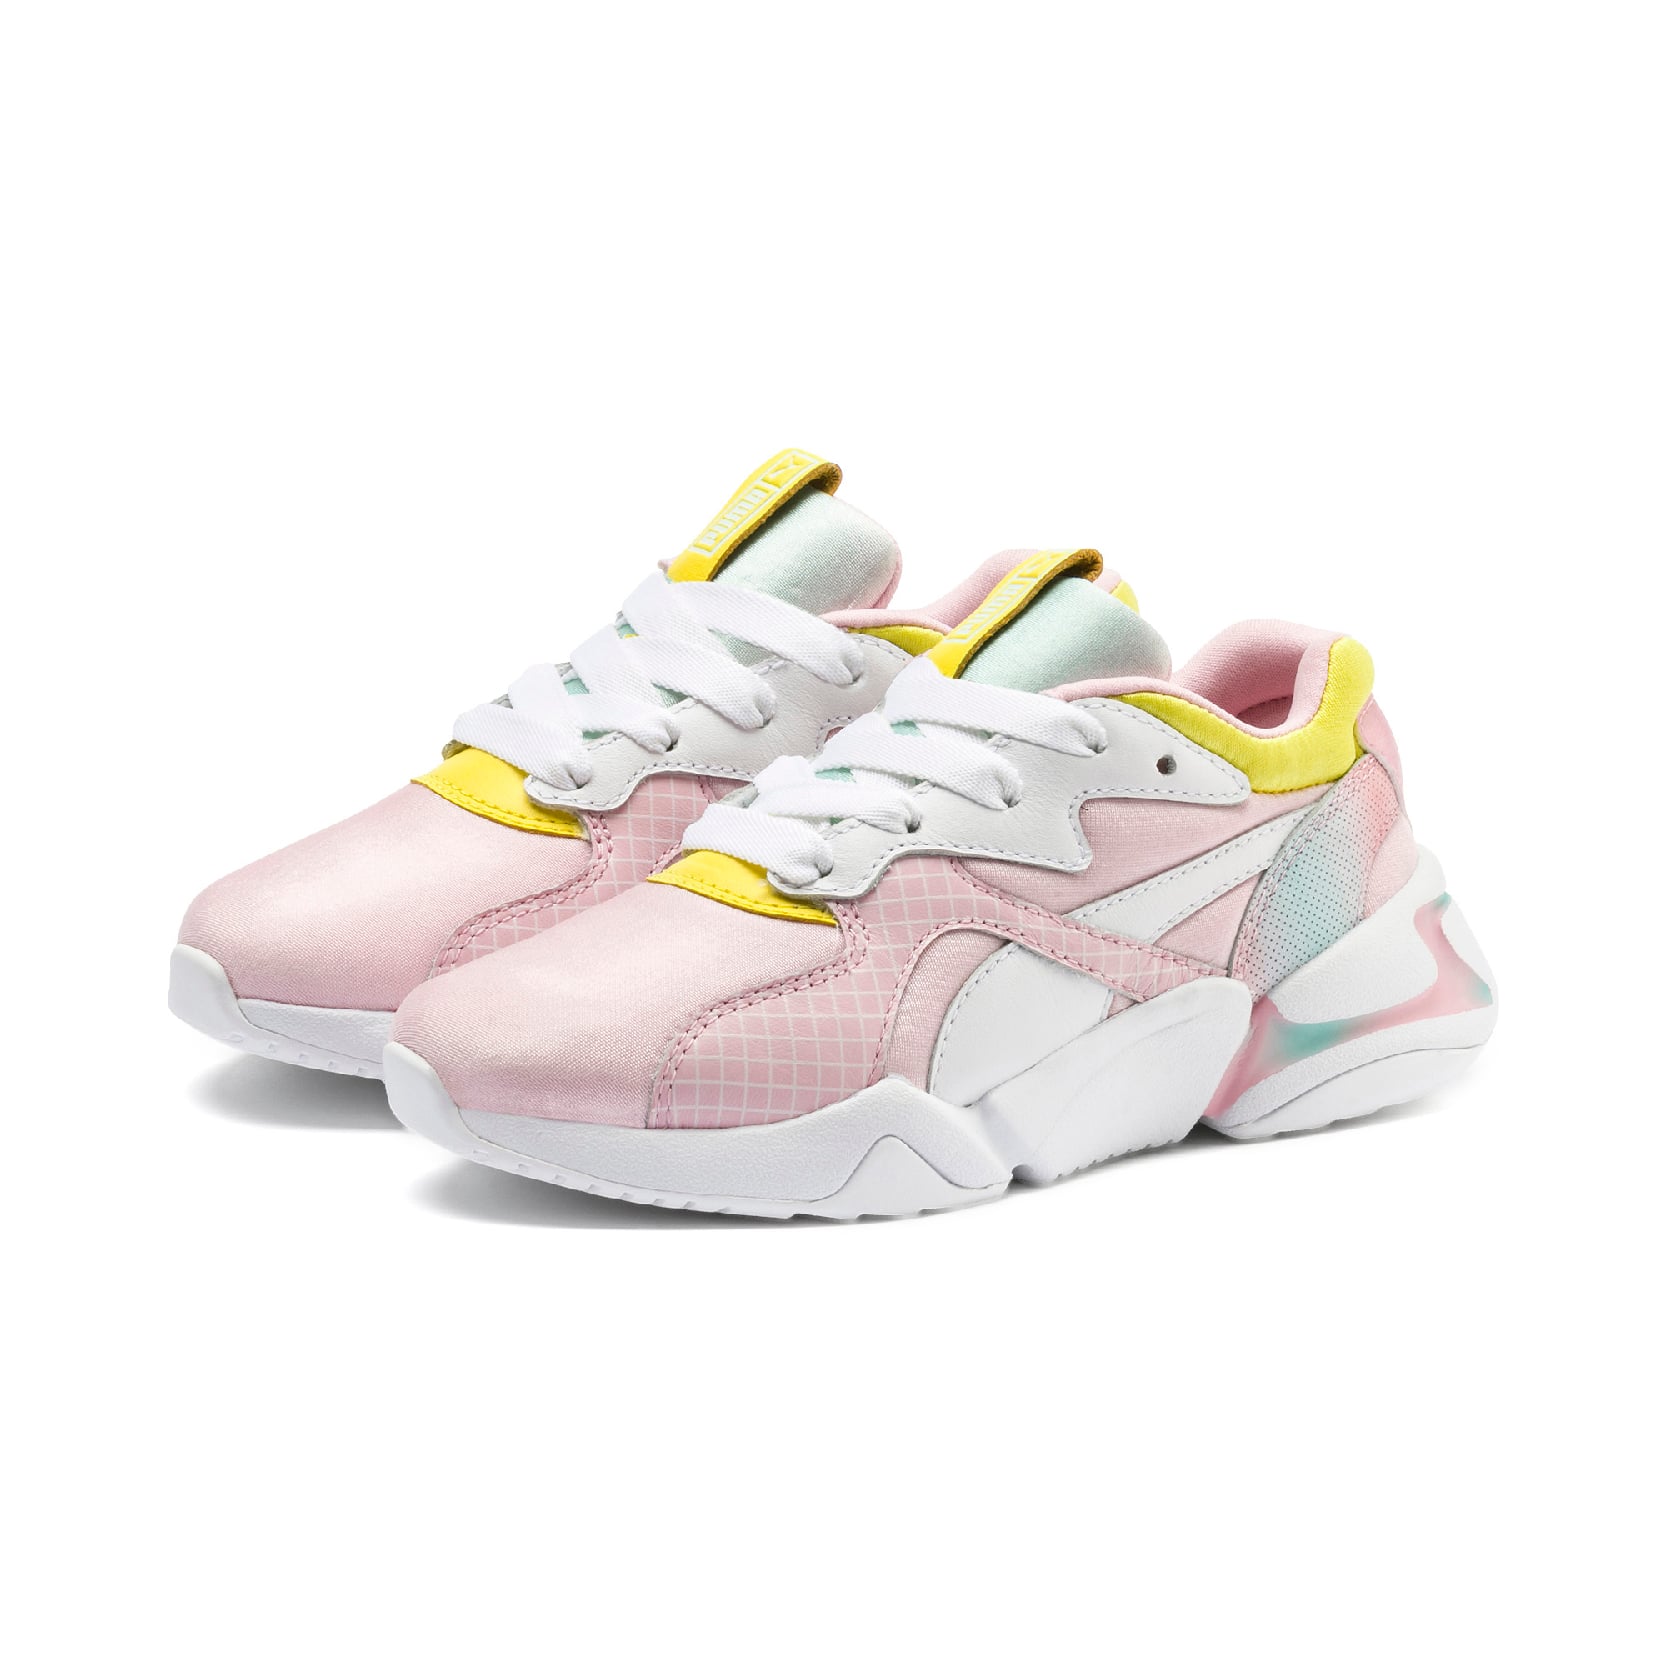 Barbie Puma Sneakers and Collection 2019 | POPSUGAR Fashion